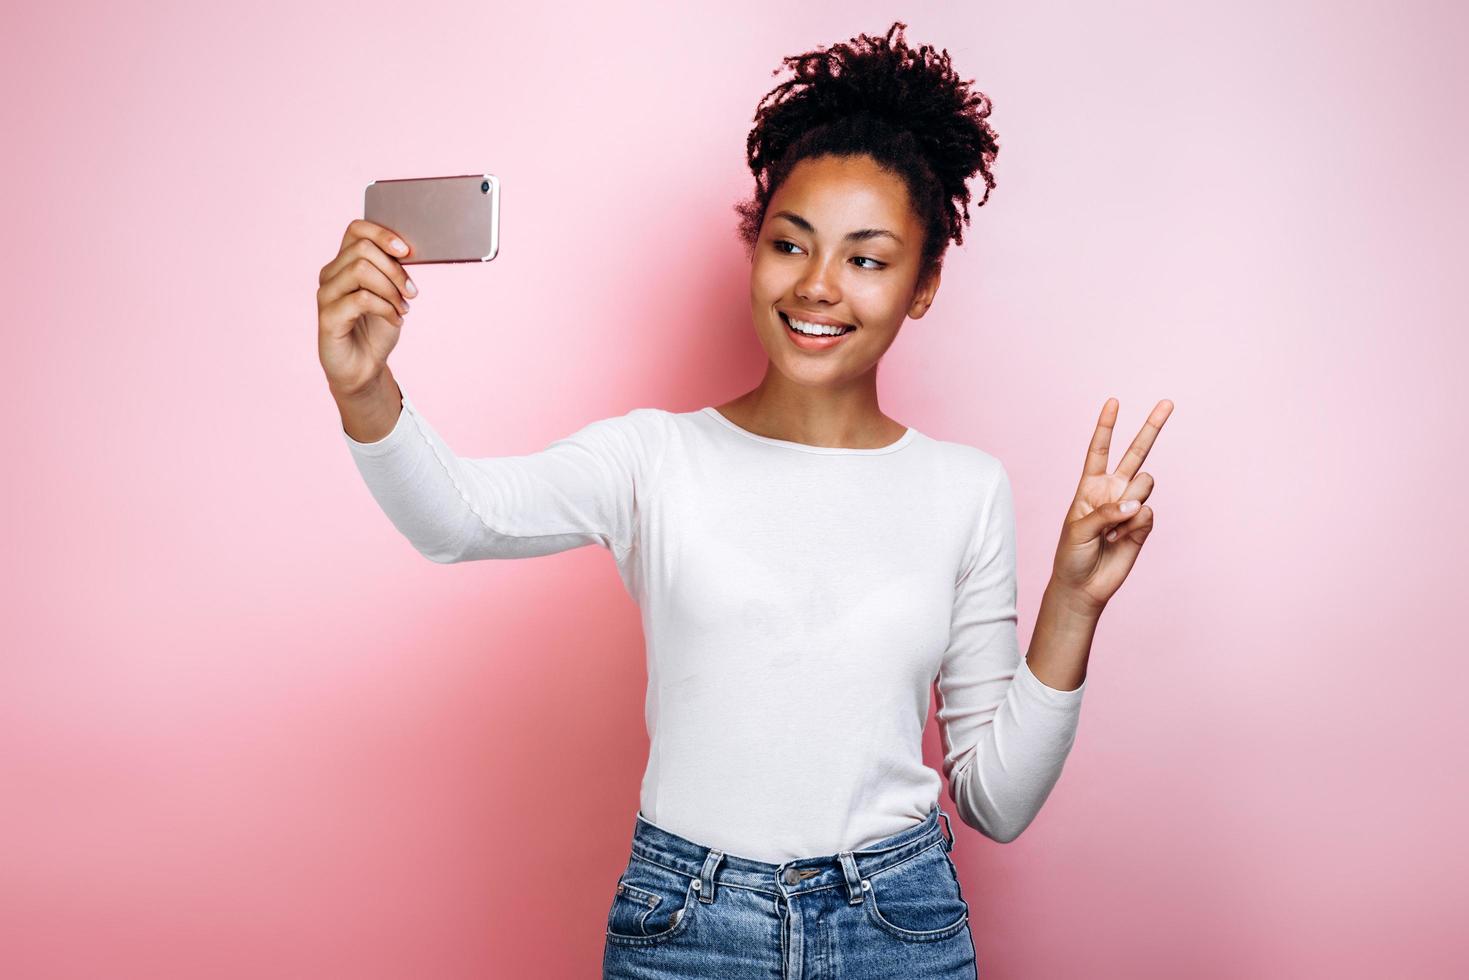 Attractive girl on a background of a pink wall makes a selfie photo